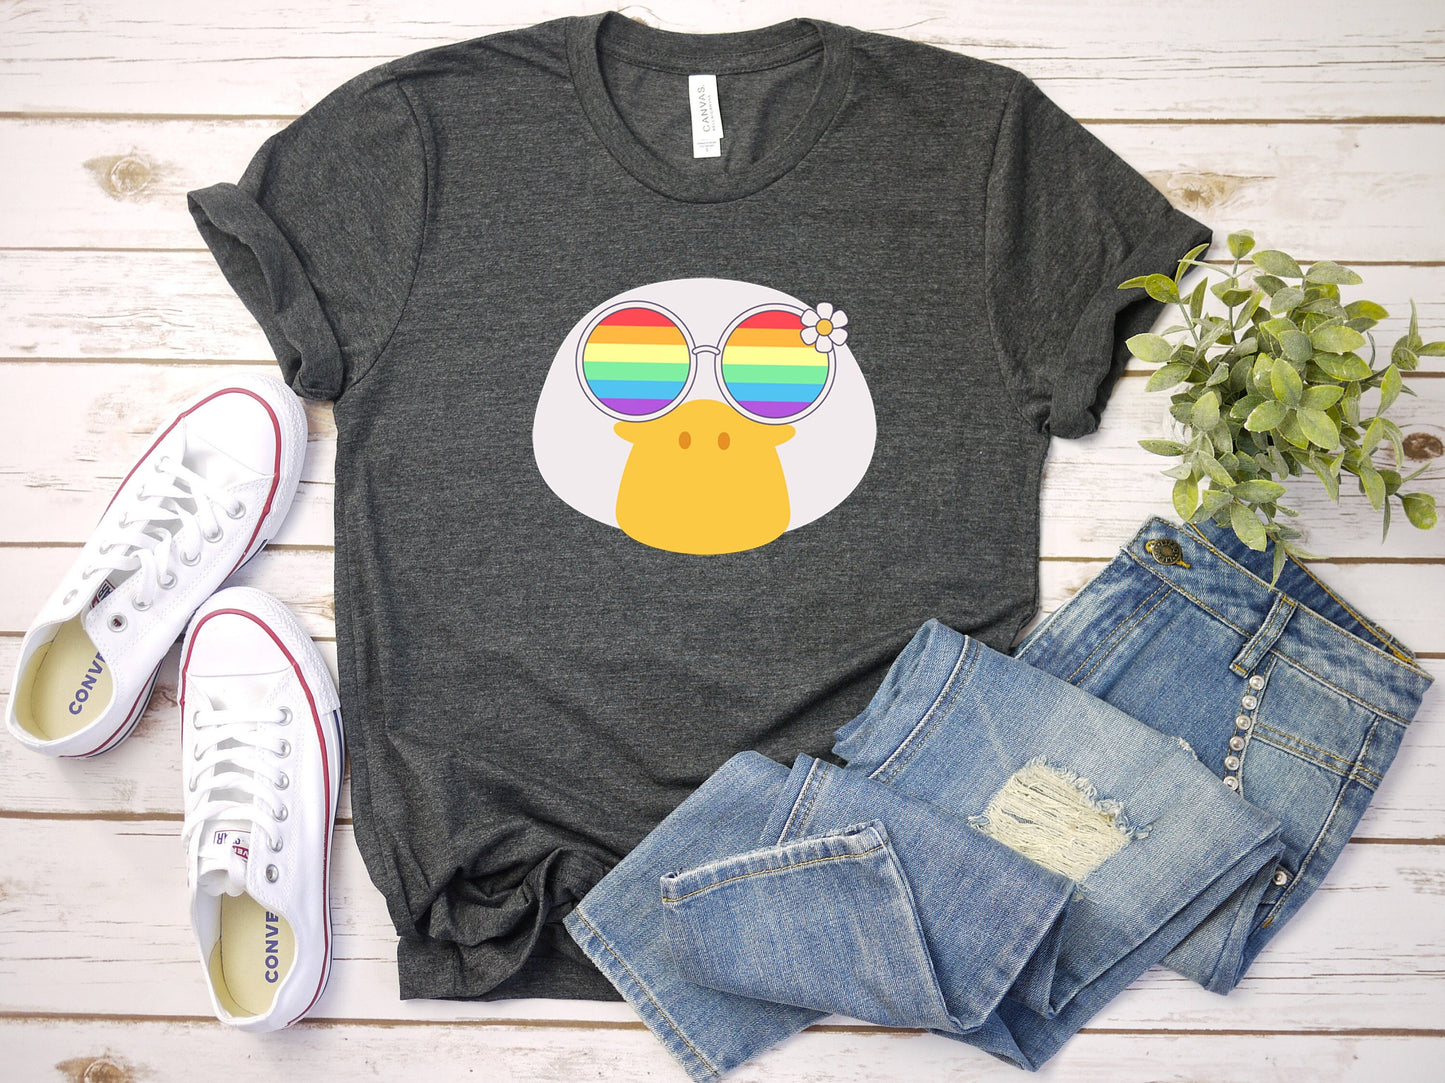 Super cute duck with rainbow glasses shirt, Rainbow glasses on an adorable duck, precious duck showing off pride. Beautiful pride duck